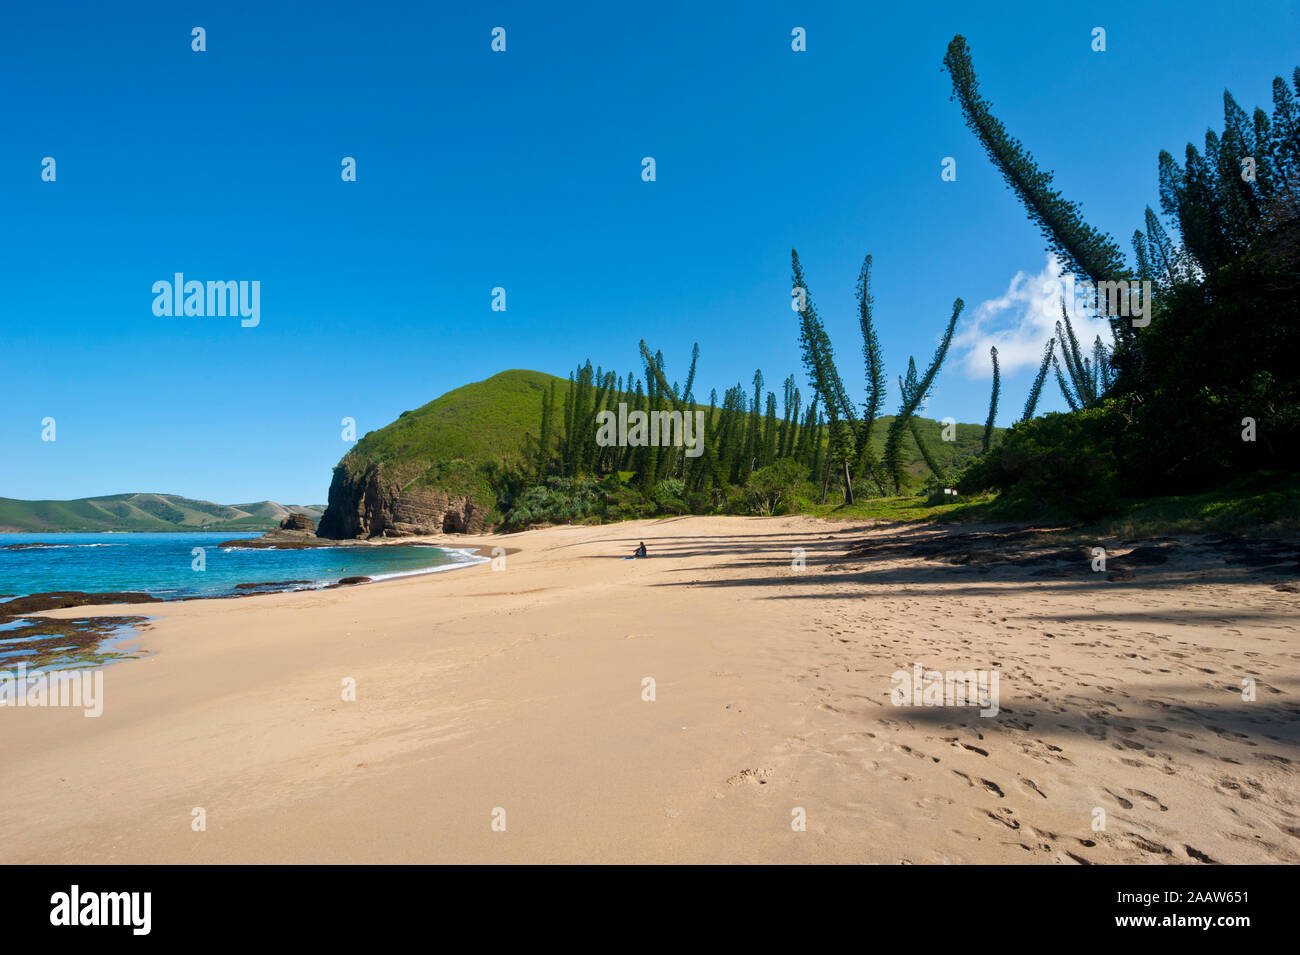 Pine trees growing at beach against blue sky during sunny day, Grande Terre, New Caledonia Stock Photo